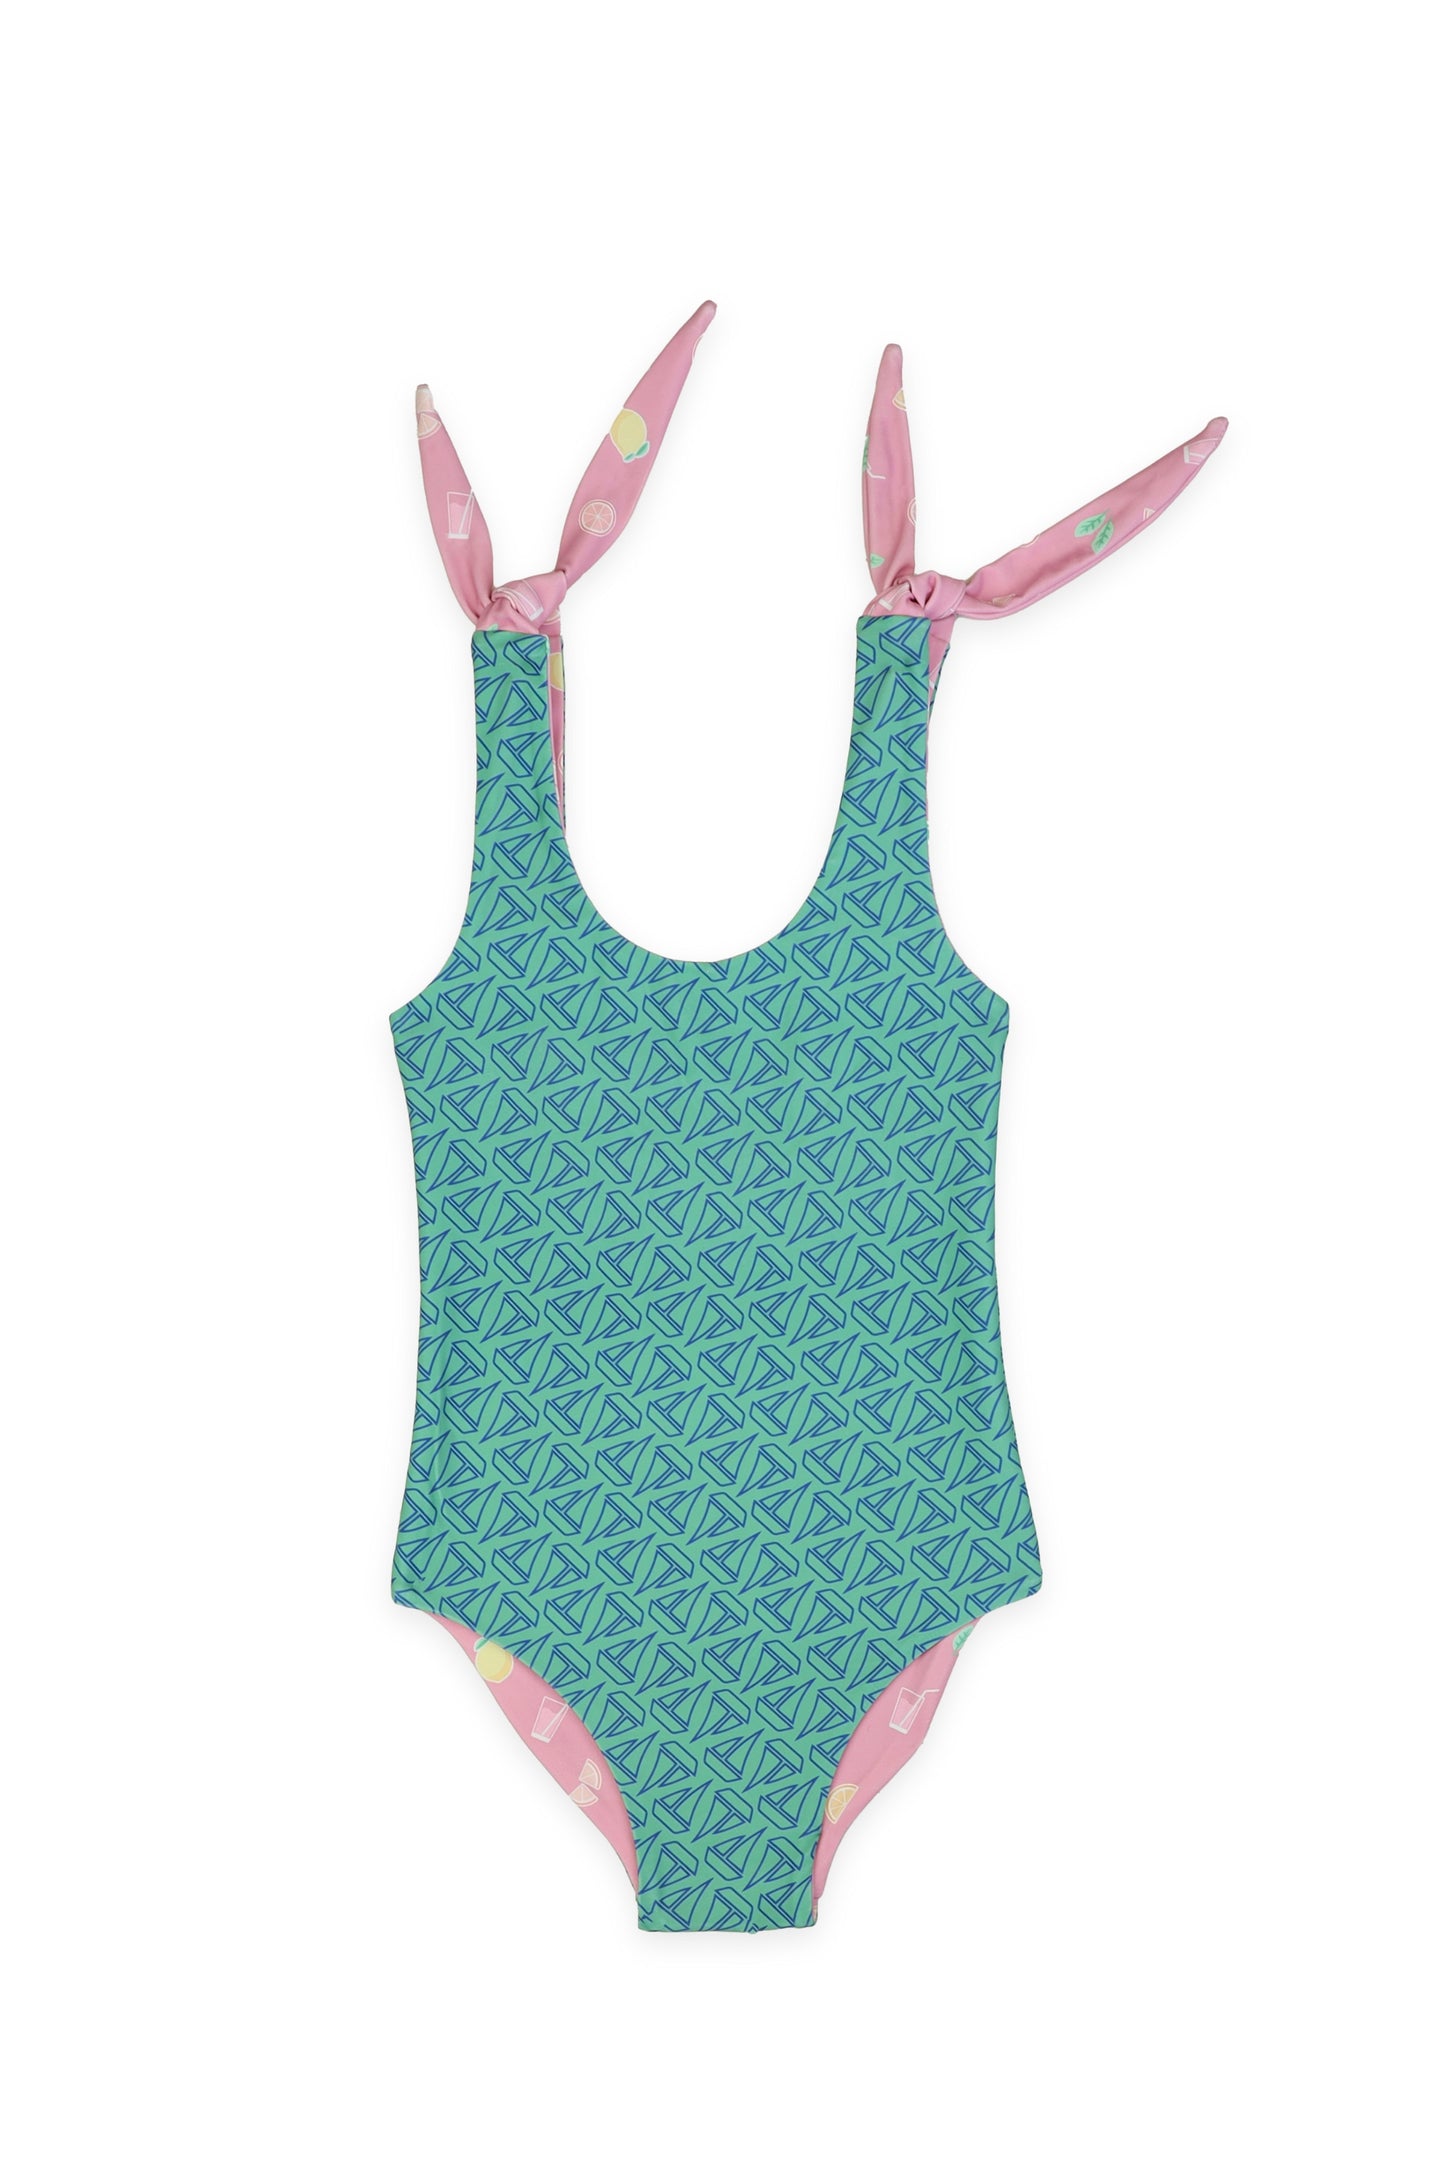 Canary Girls One Piece - Reversible